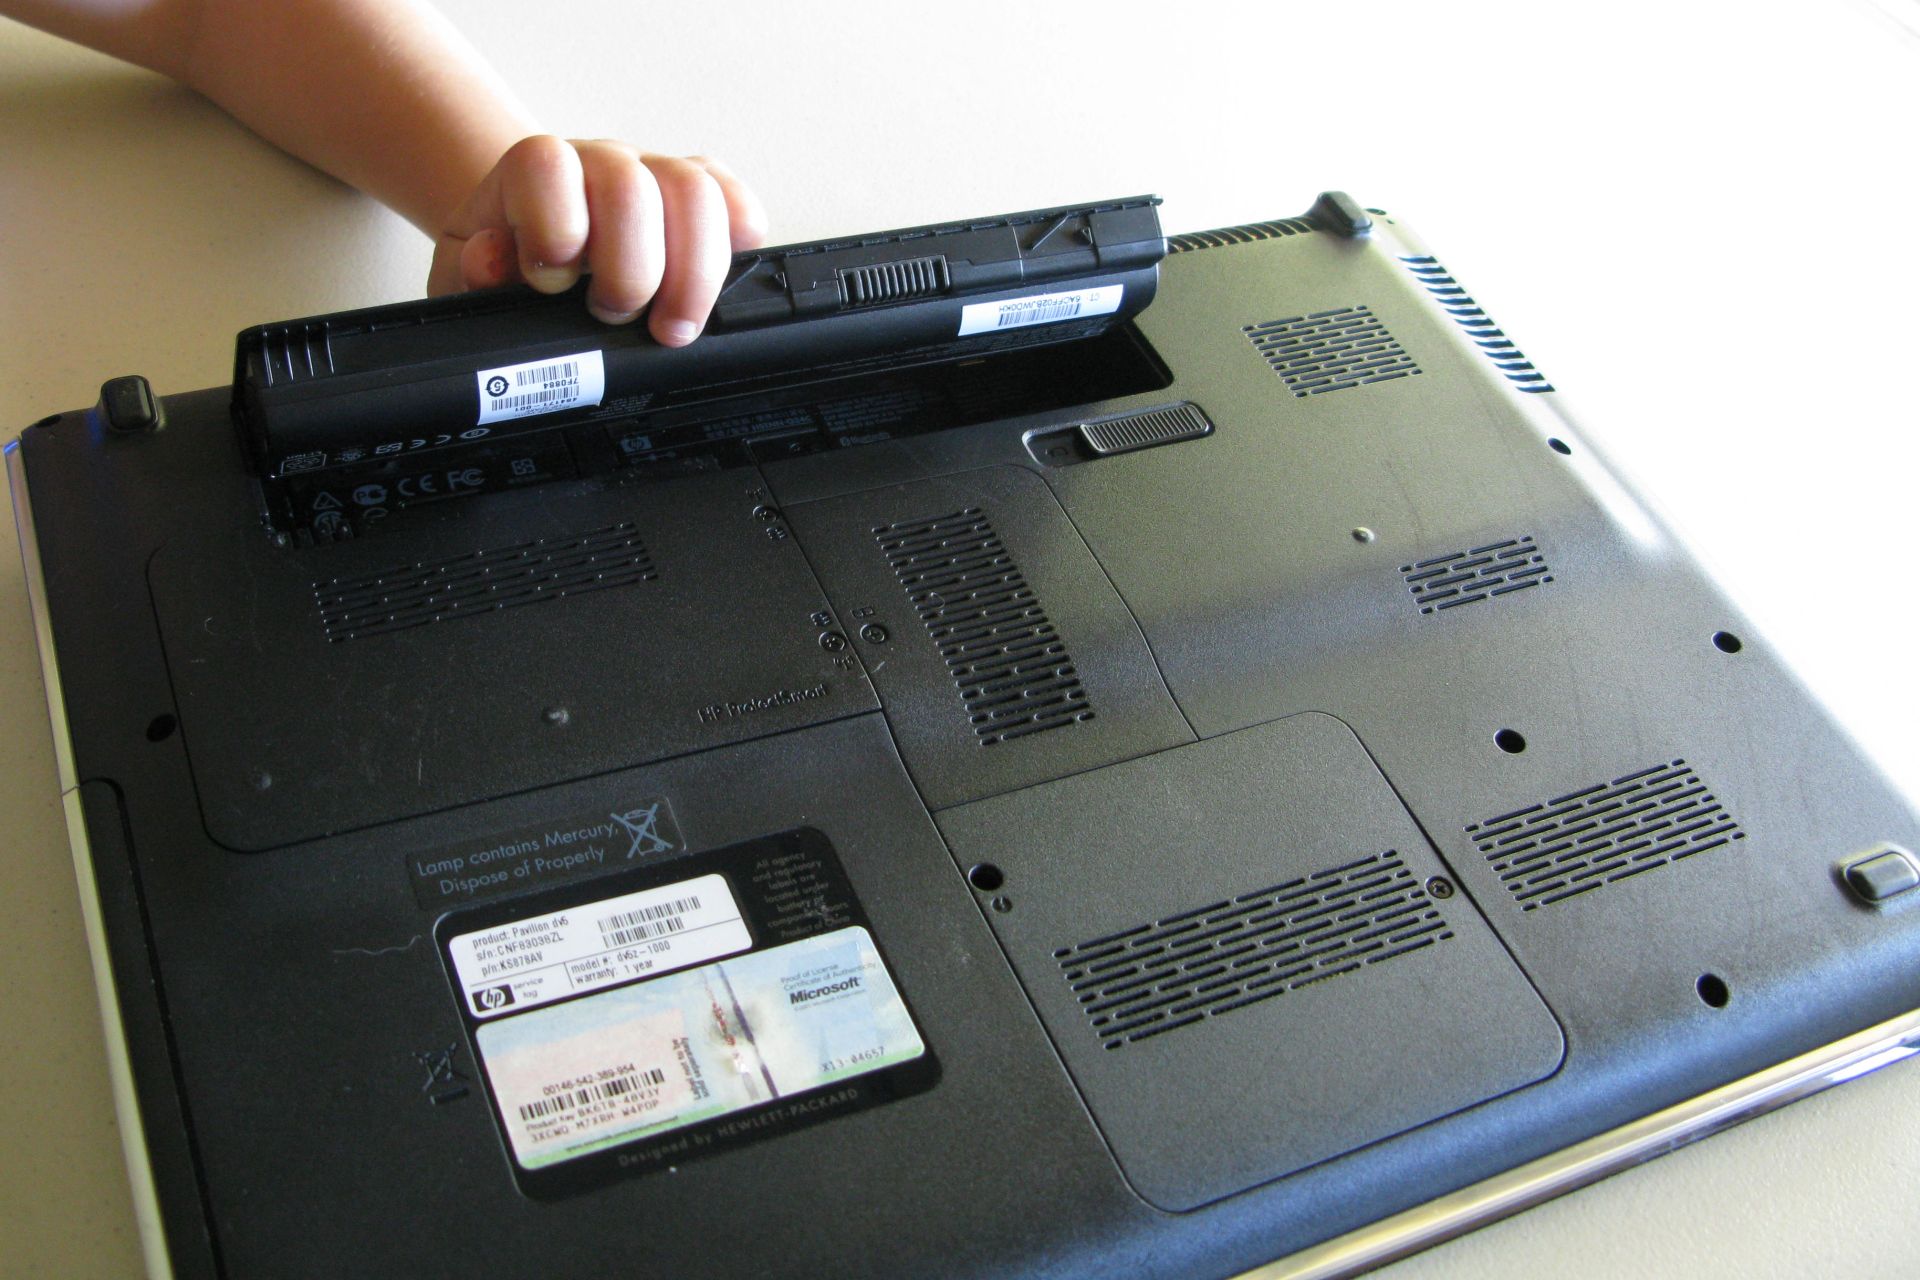 Laptop battery being removed